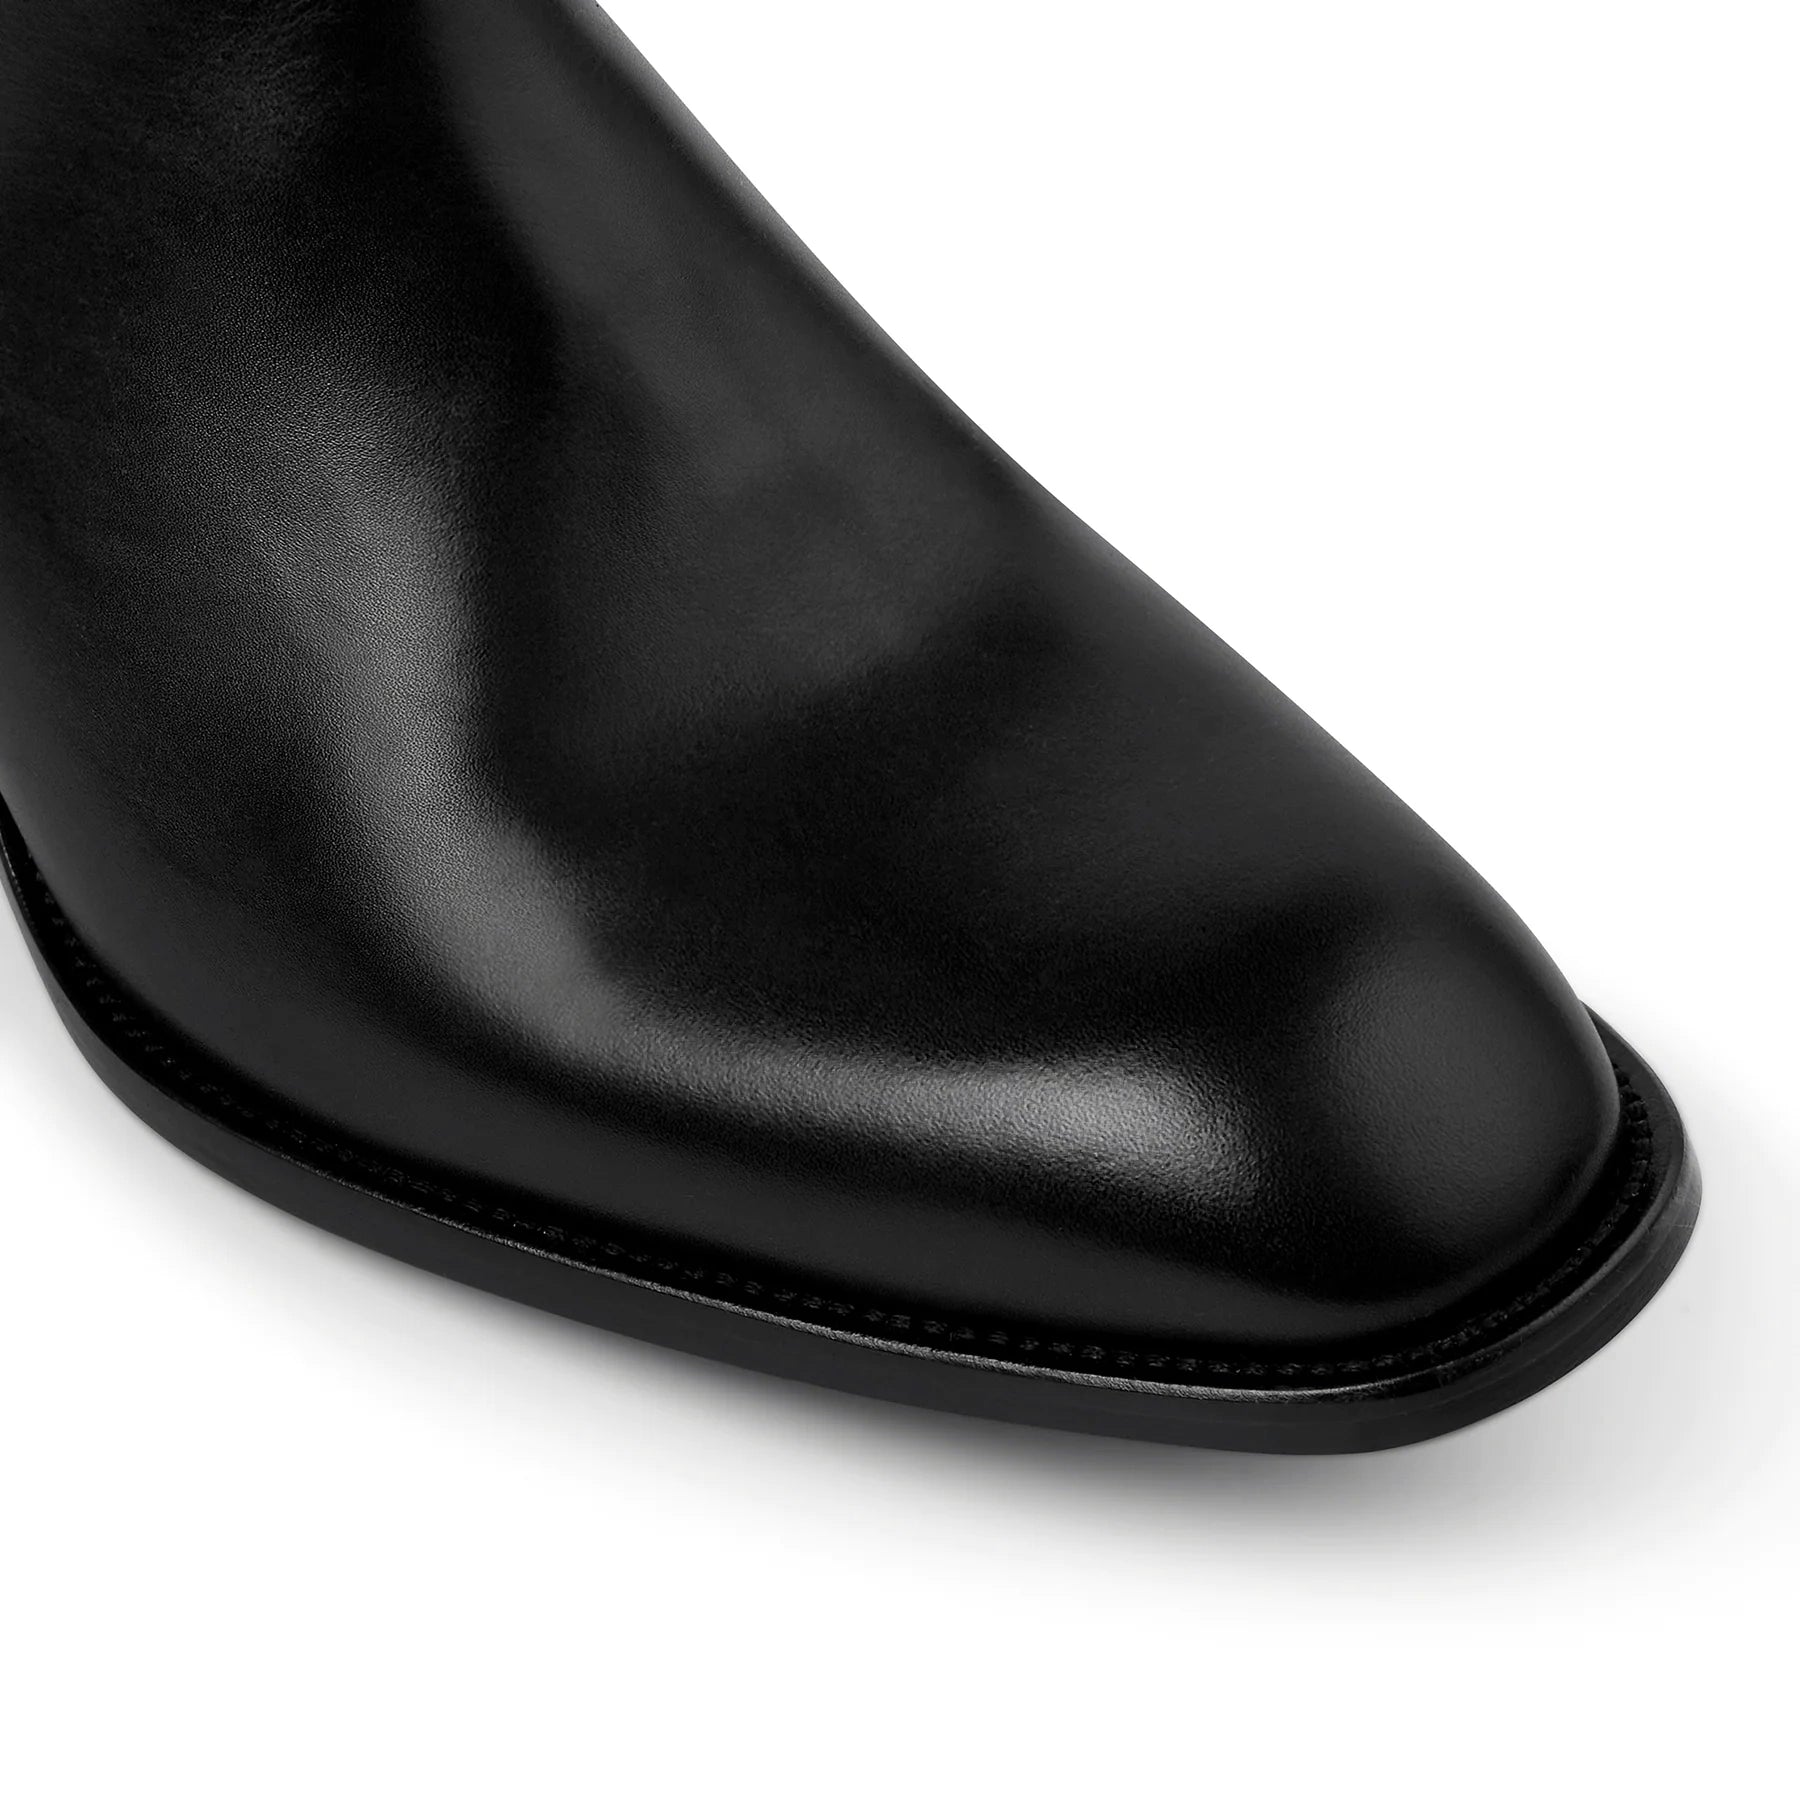 Chelsea Boot - Black Leather